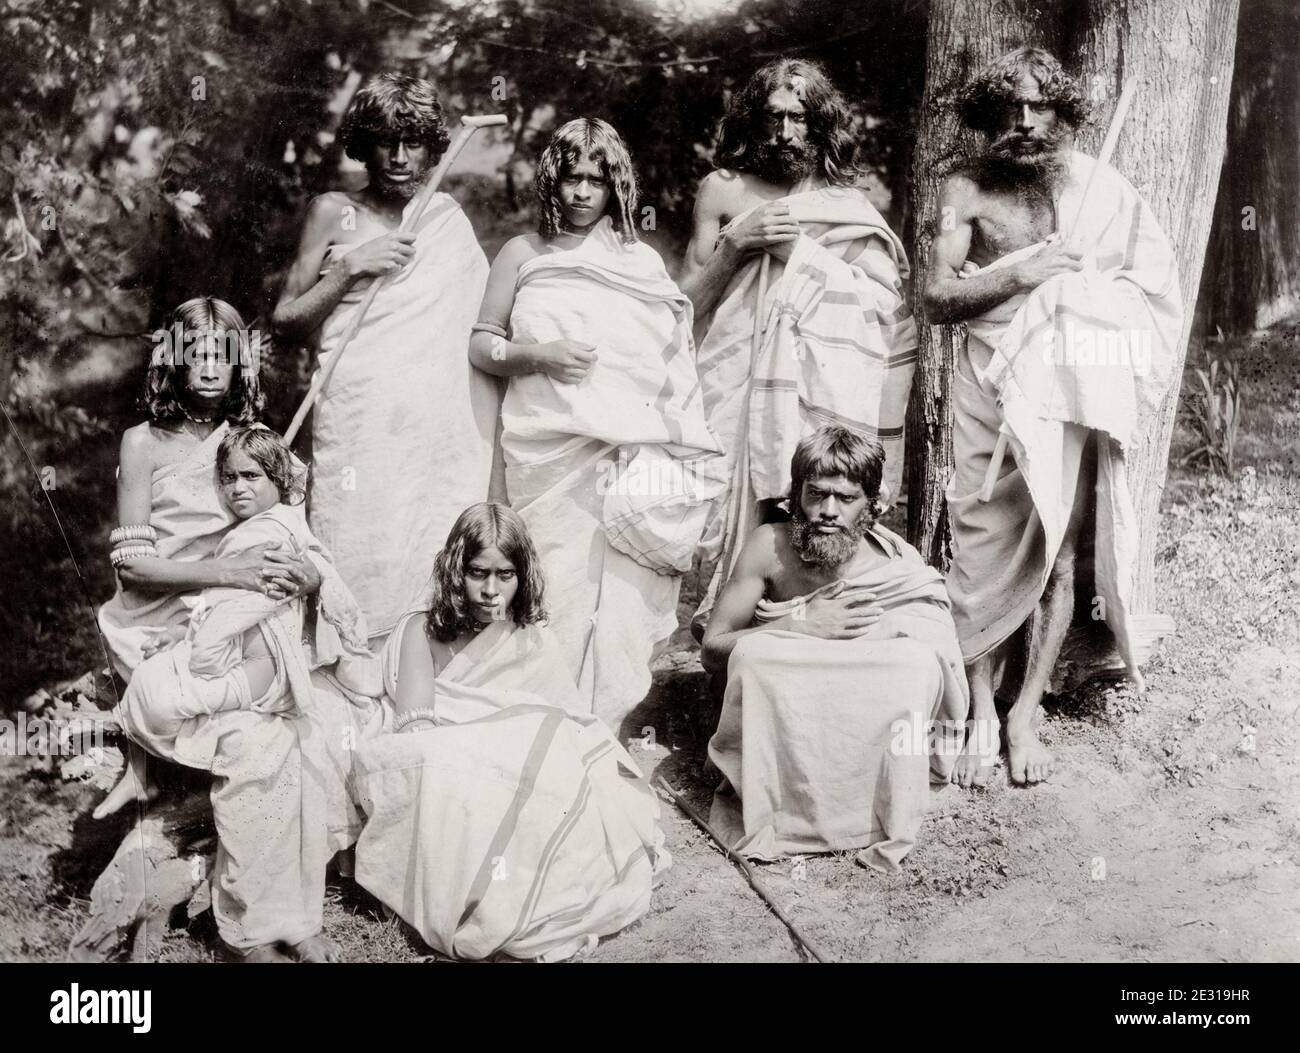 Vintage 19th century photograph: group of Toda people, India. Toda people are a Dravidian ethnic group who live in the Nilgiri Mountains of the Indian state of Tamil Nadu. Stock Photo